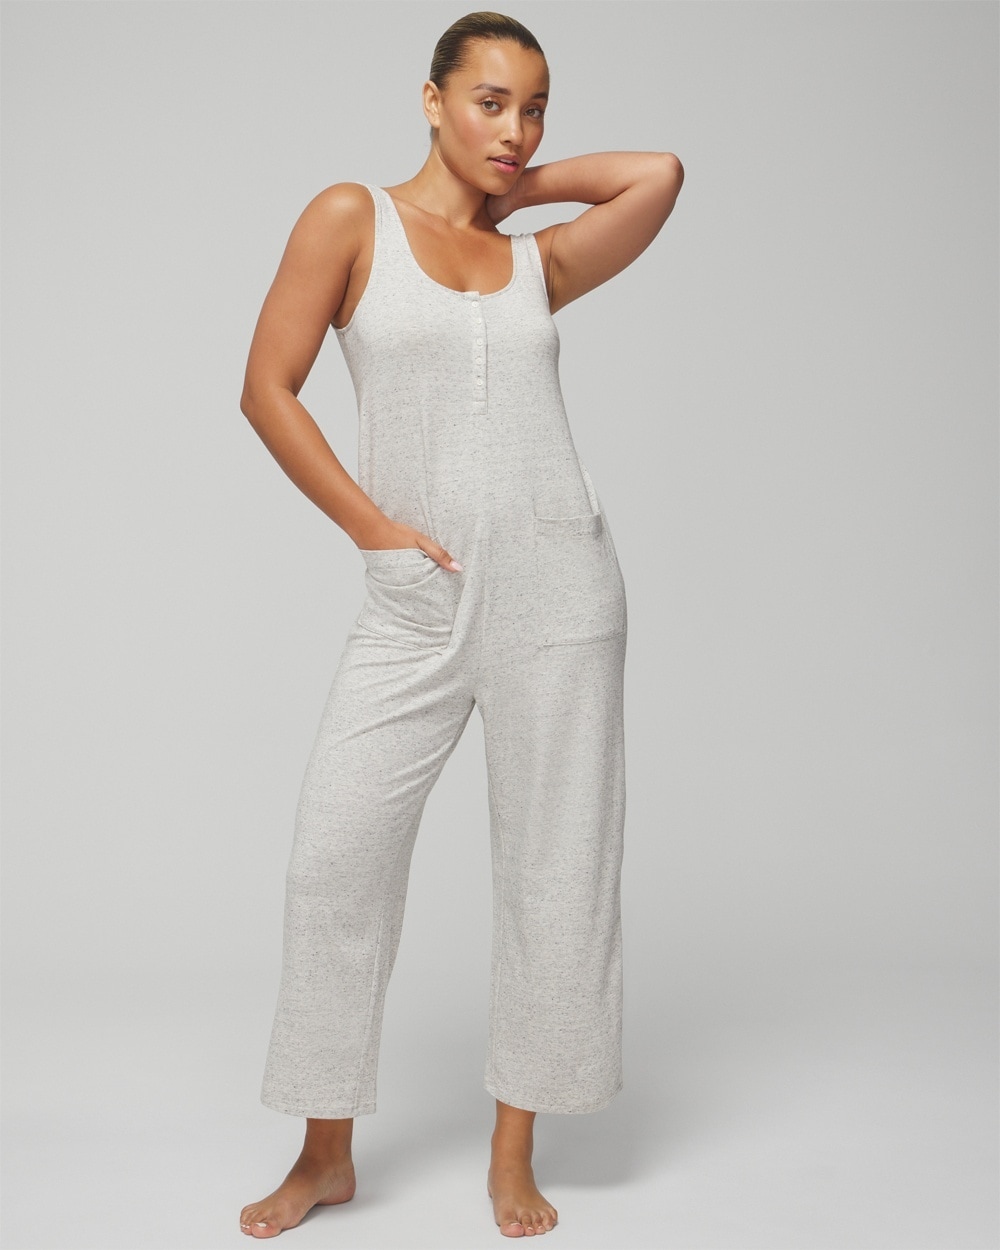 Soma Women's Most-loved Cotton Jumpsuit In Heather Agate Size Medium |  In White